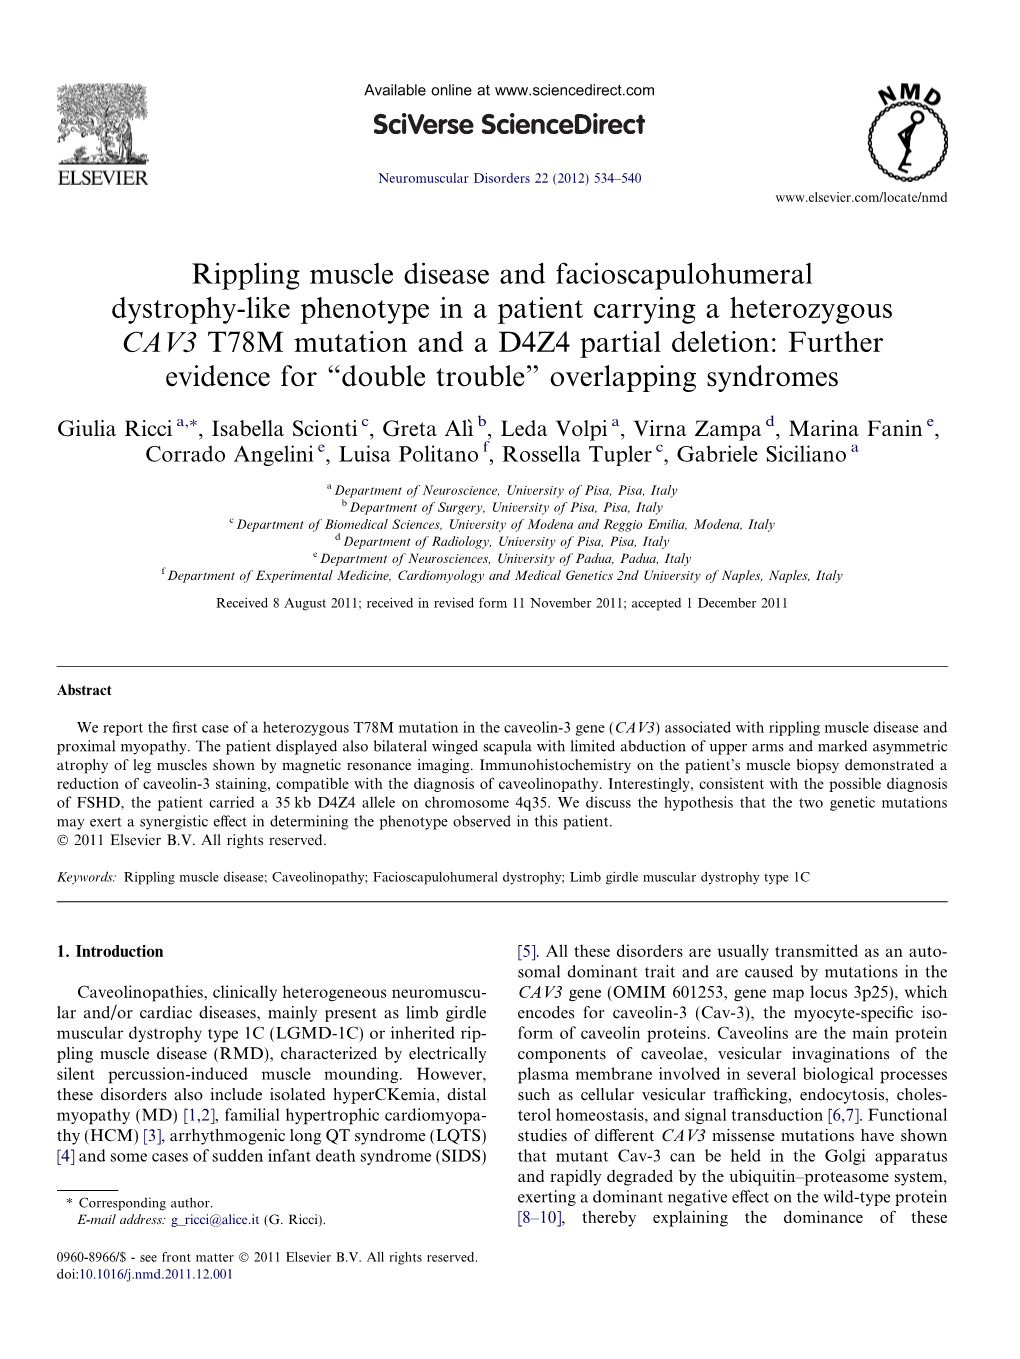 Rippling Muscle Disease and Facioscapulohumeral Dystrophy-Like